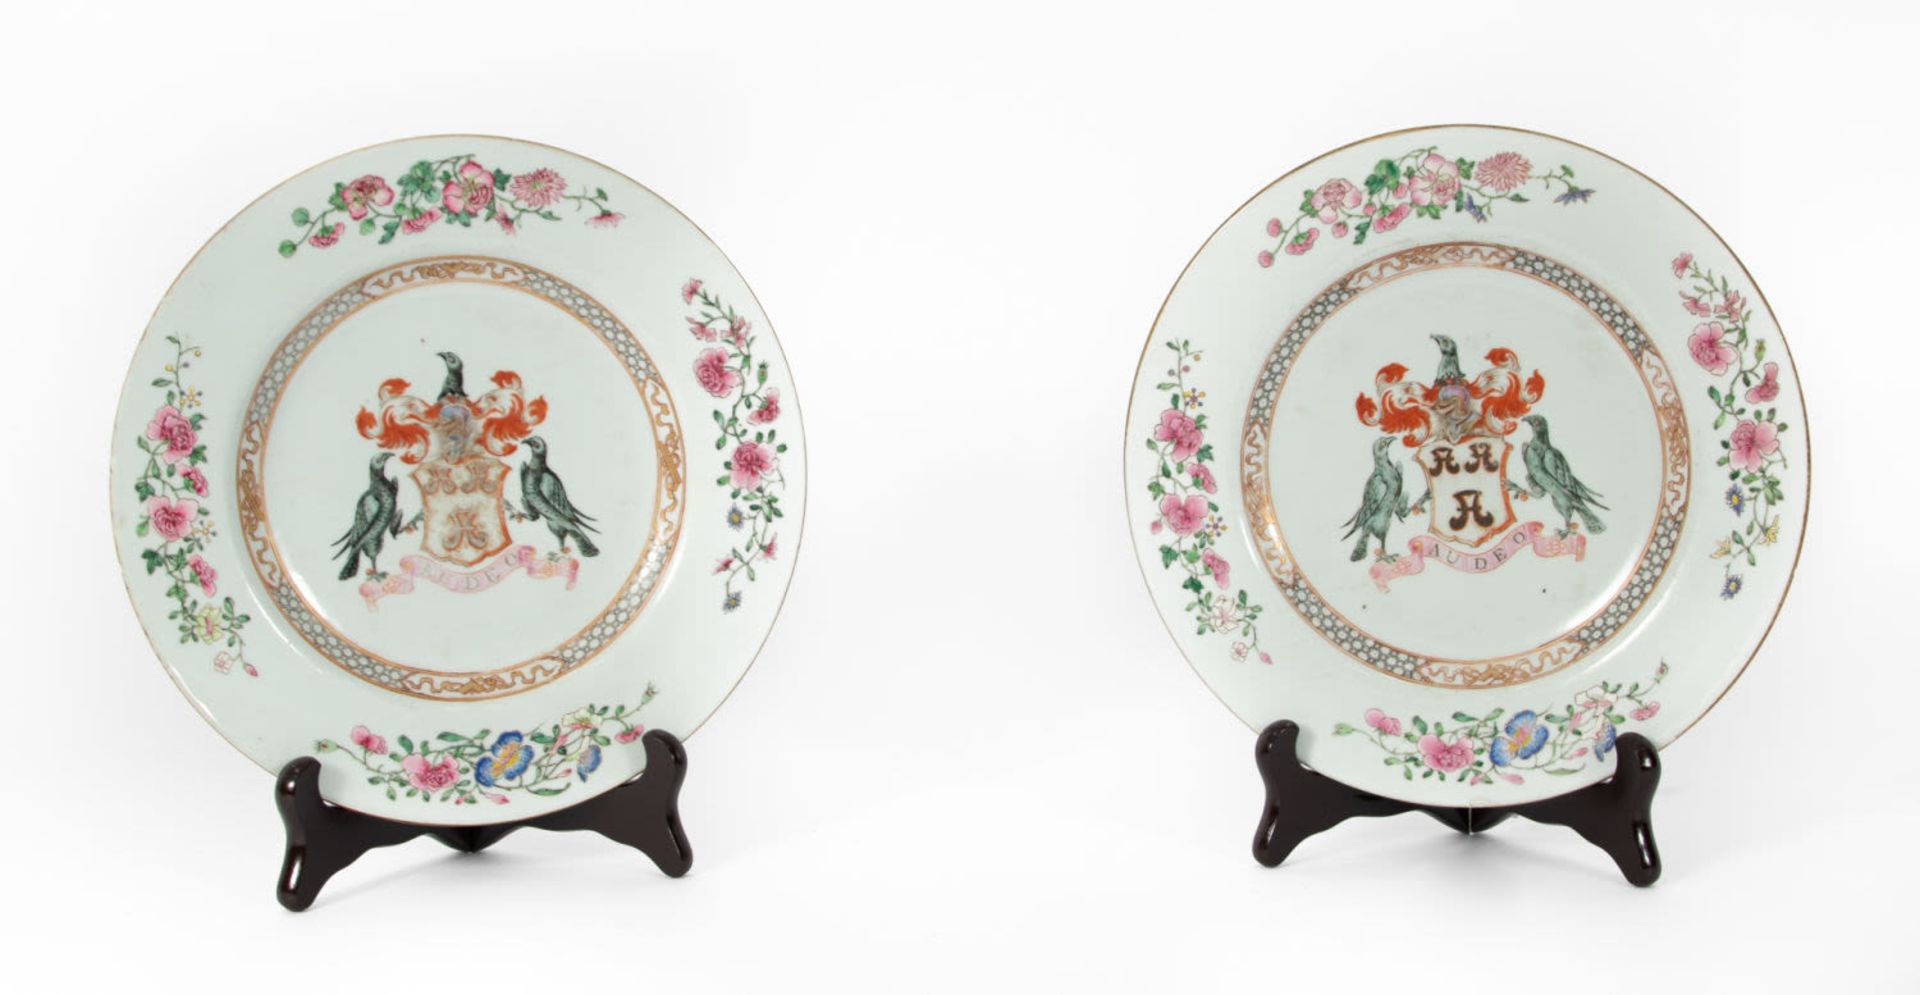 Pair of Chinese export porcelain plates for the English market, circa 1735, China, 18th century, Yon